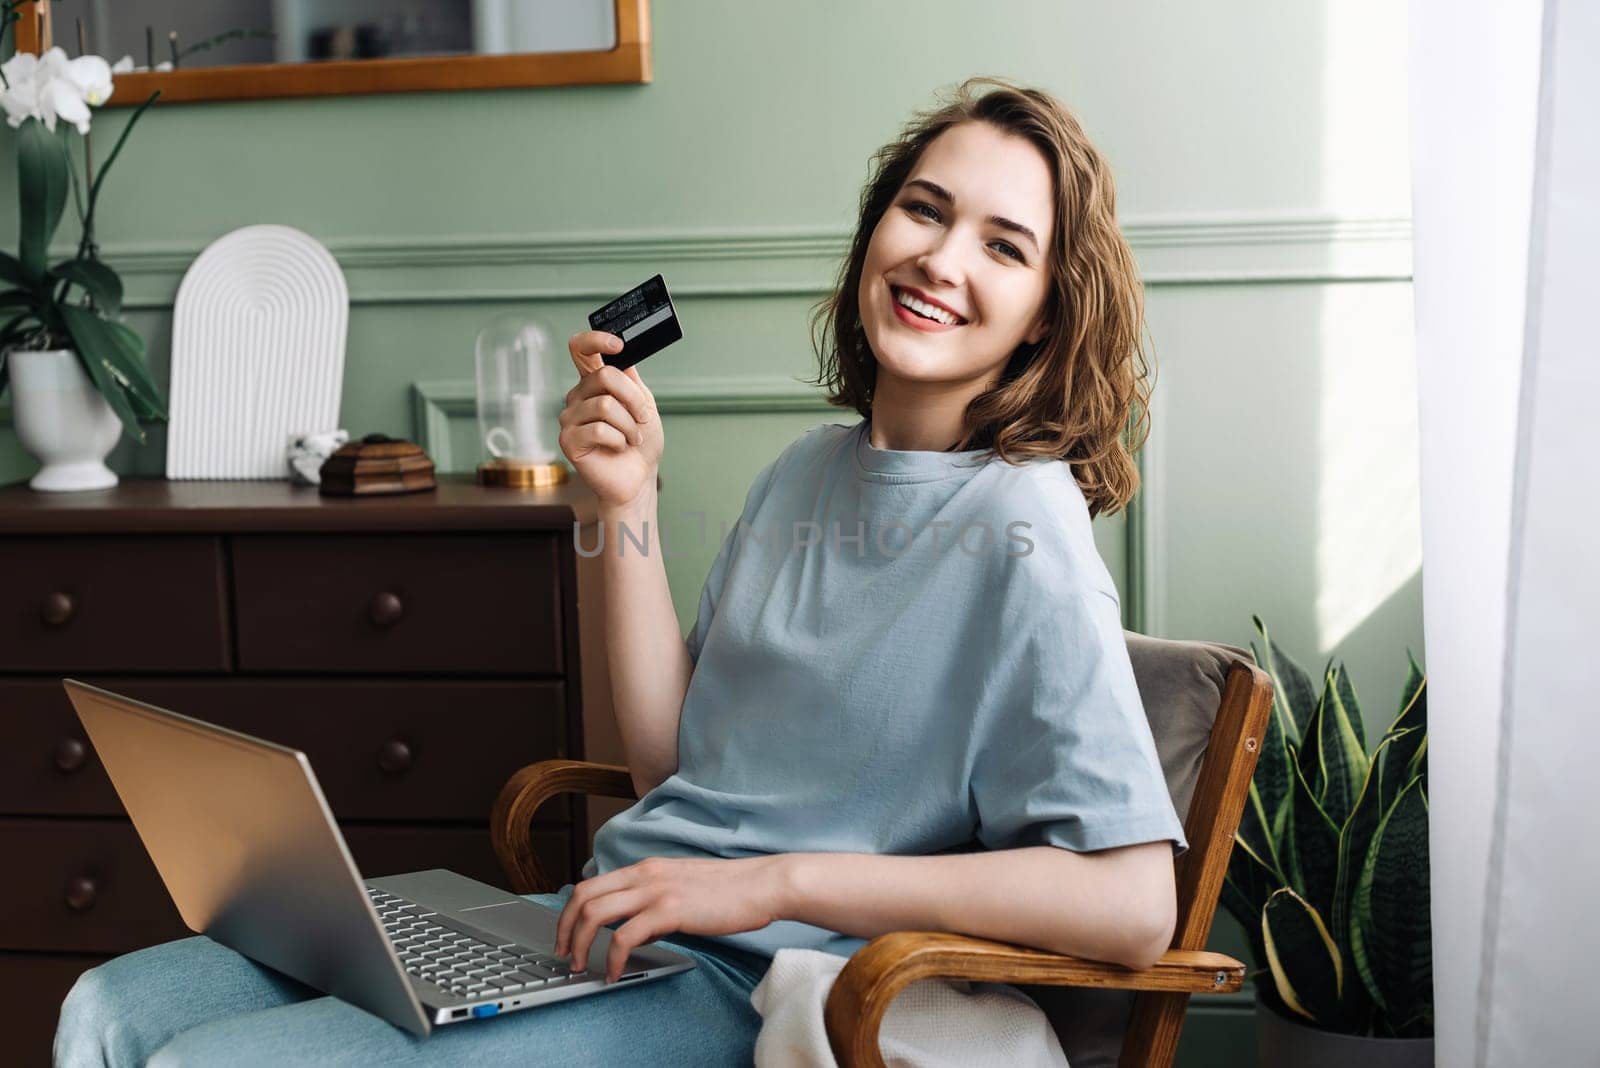 Online Shopping Joy. Young Woman Delighted with Credit Card and Laptop. Cheerful Woman Making Purchases Online with Credit Card and Laptop. Happy Shopper by ViShark